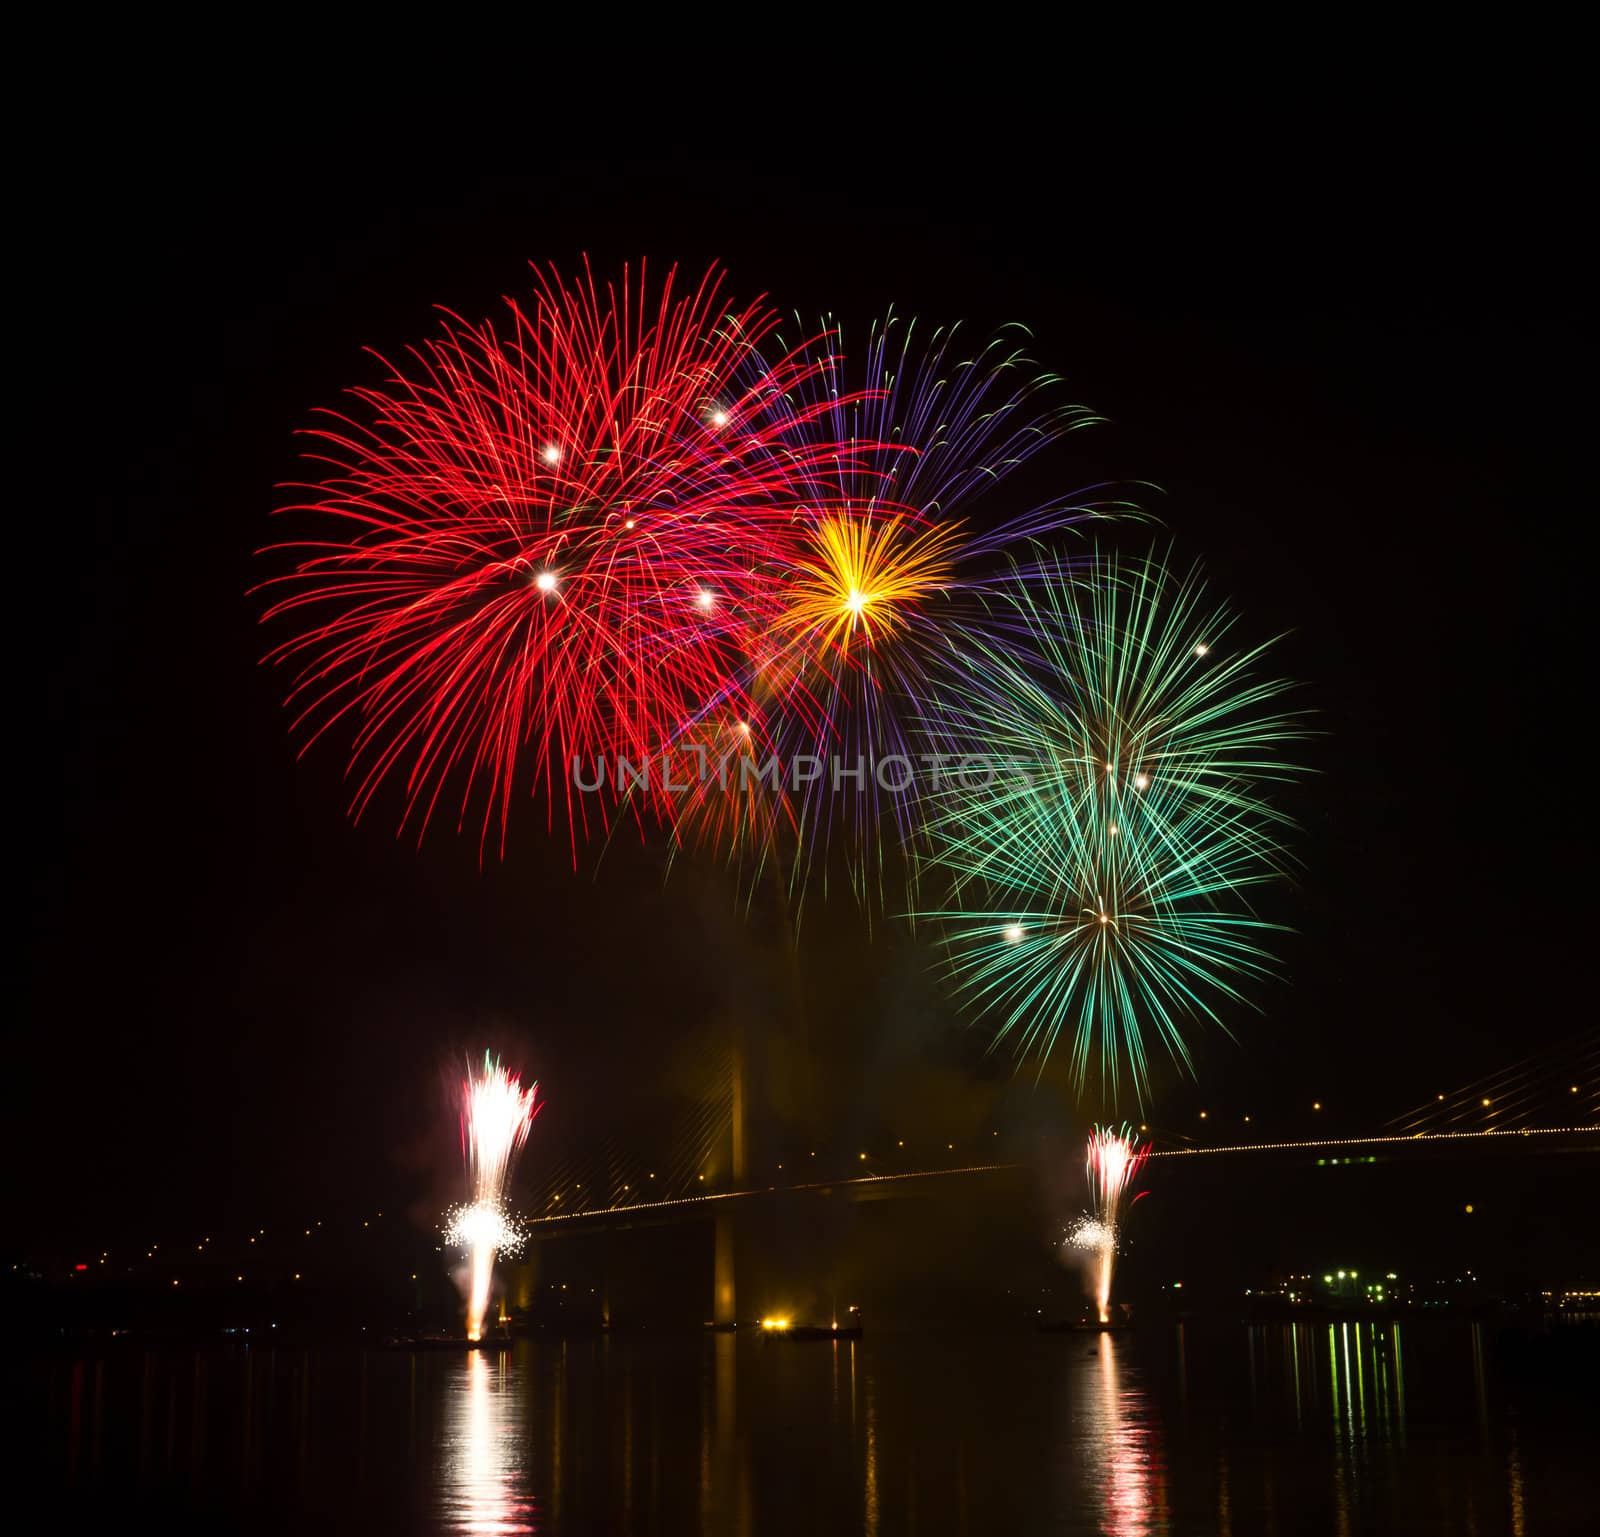 firework in night sky by tungphoto